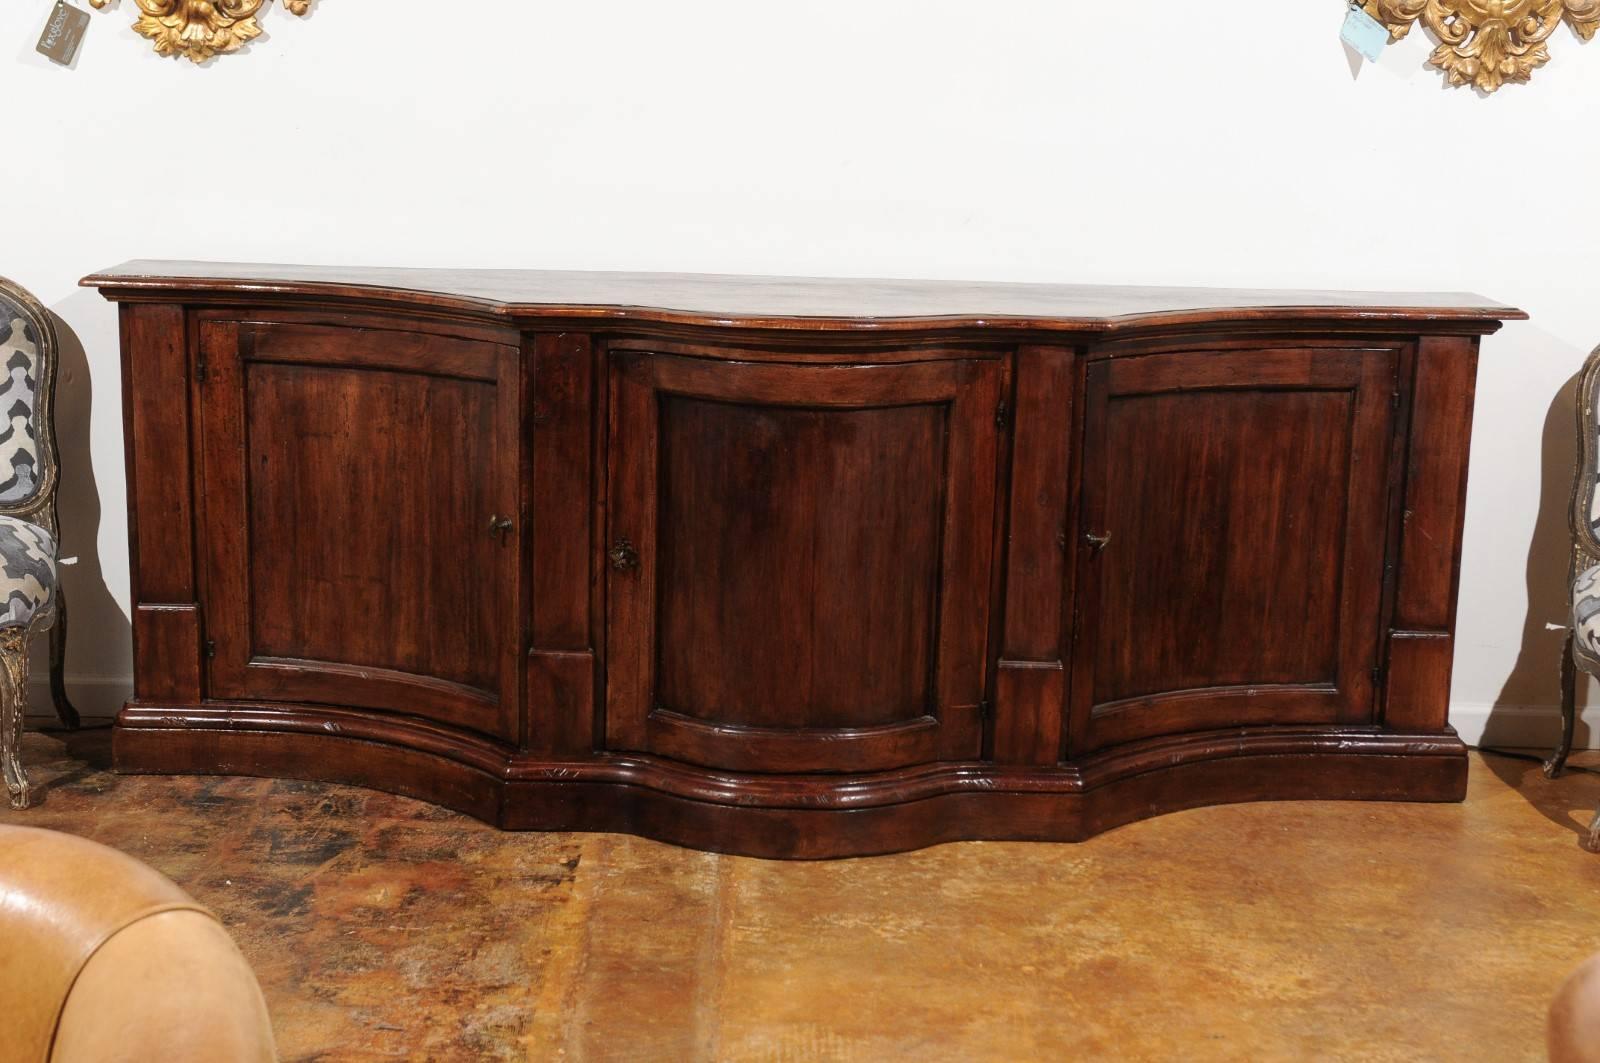 An Italian serpentine walnut three-door long buffet from the early 19th century. This Italian walnut buffet features a planked serpentine top with rounded edges, sitting above a façade made of three doors, discreetly adorned with recessed panels and